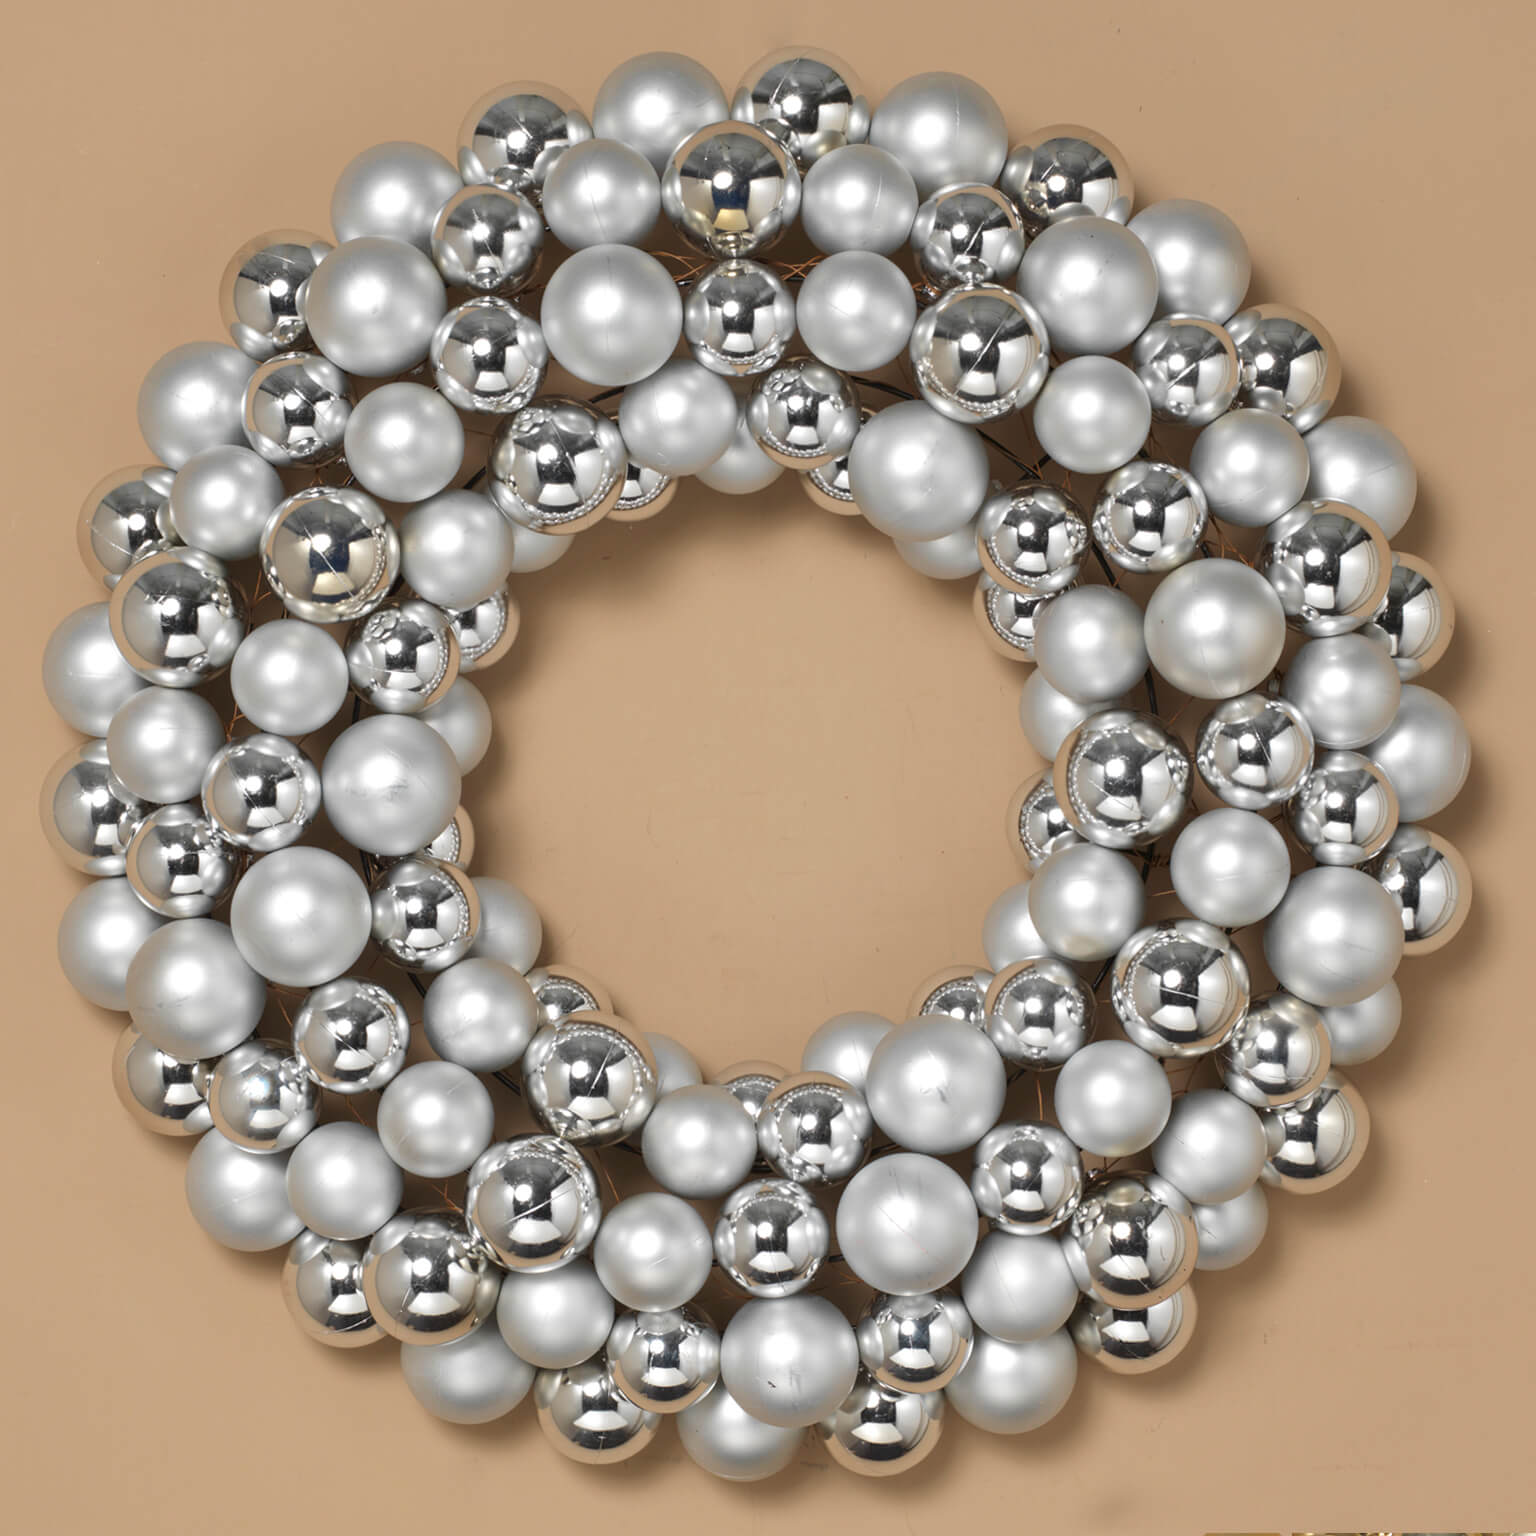 Silver Holiday Shatterproof Ornament Wreath